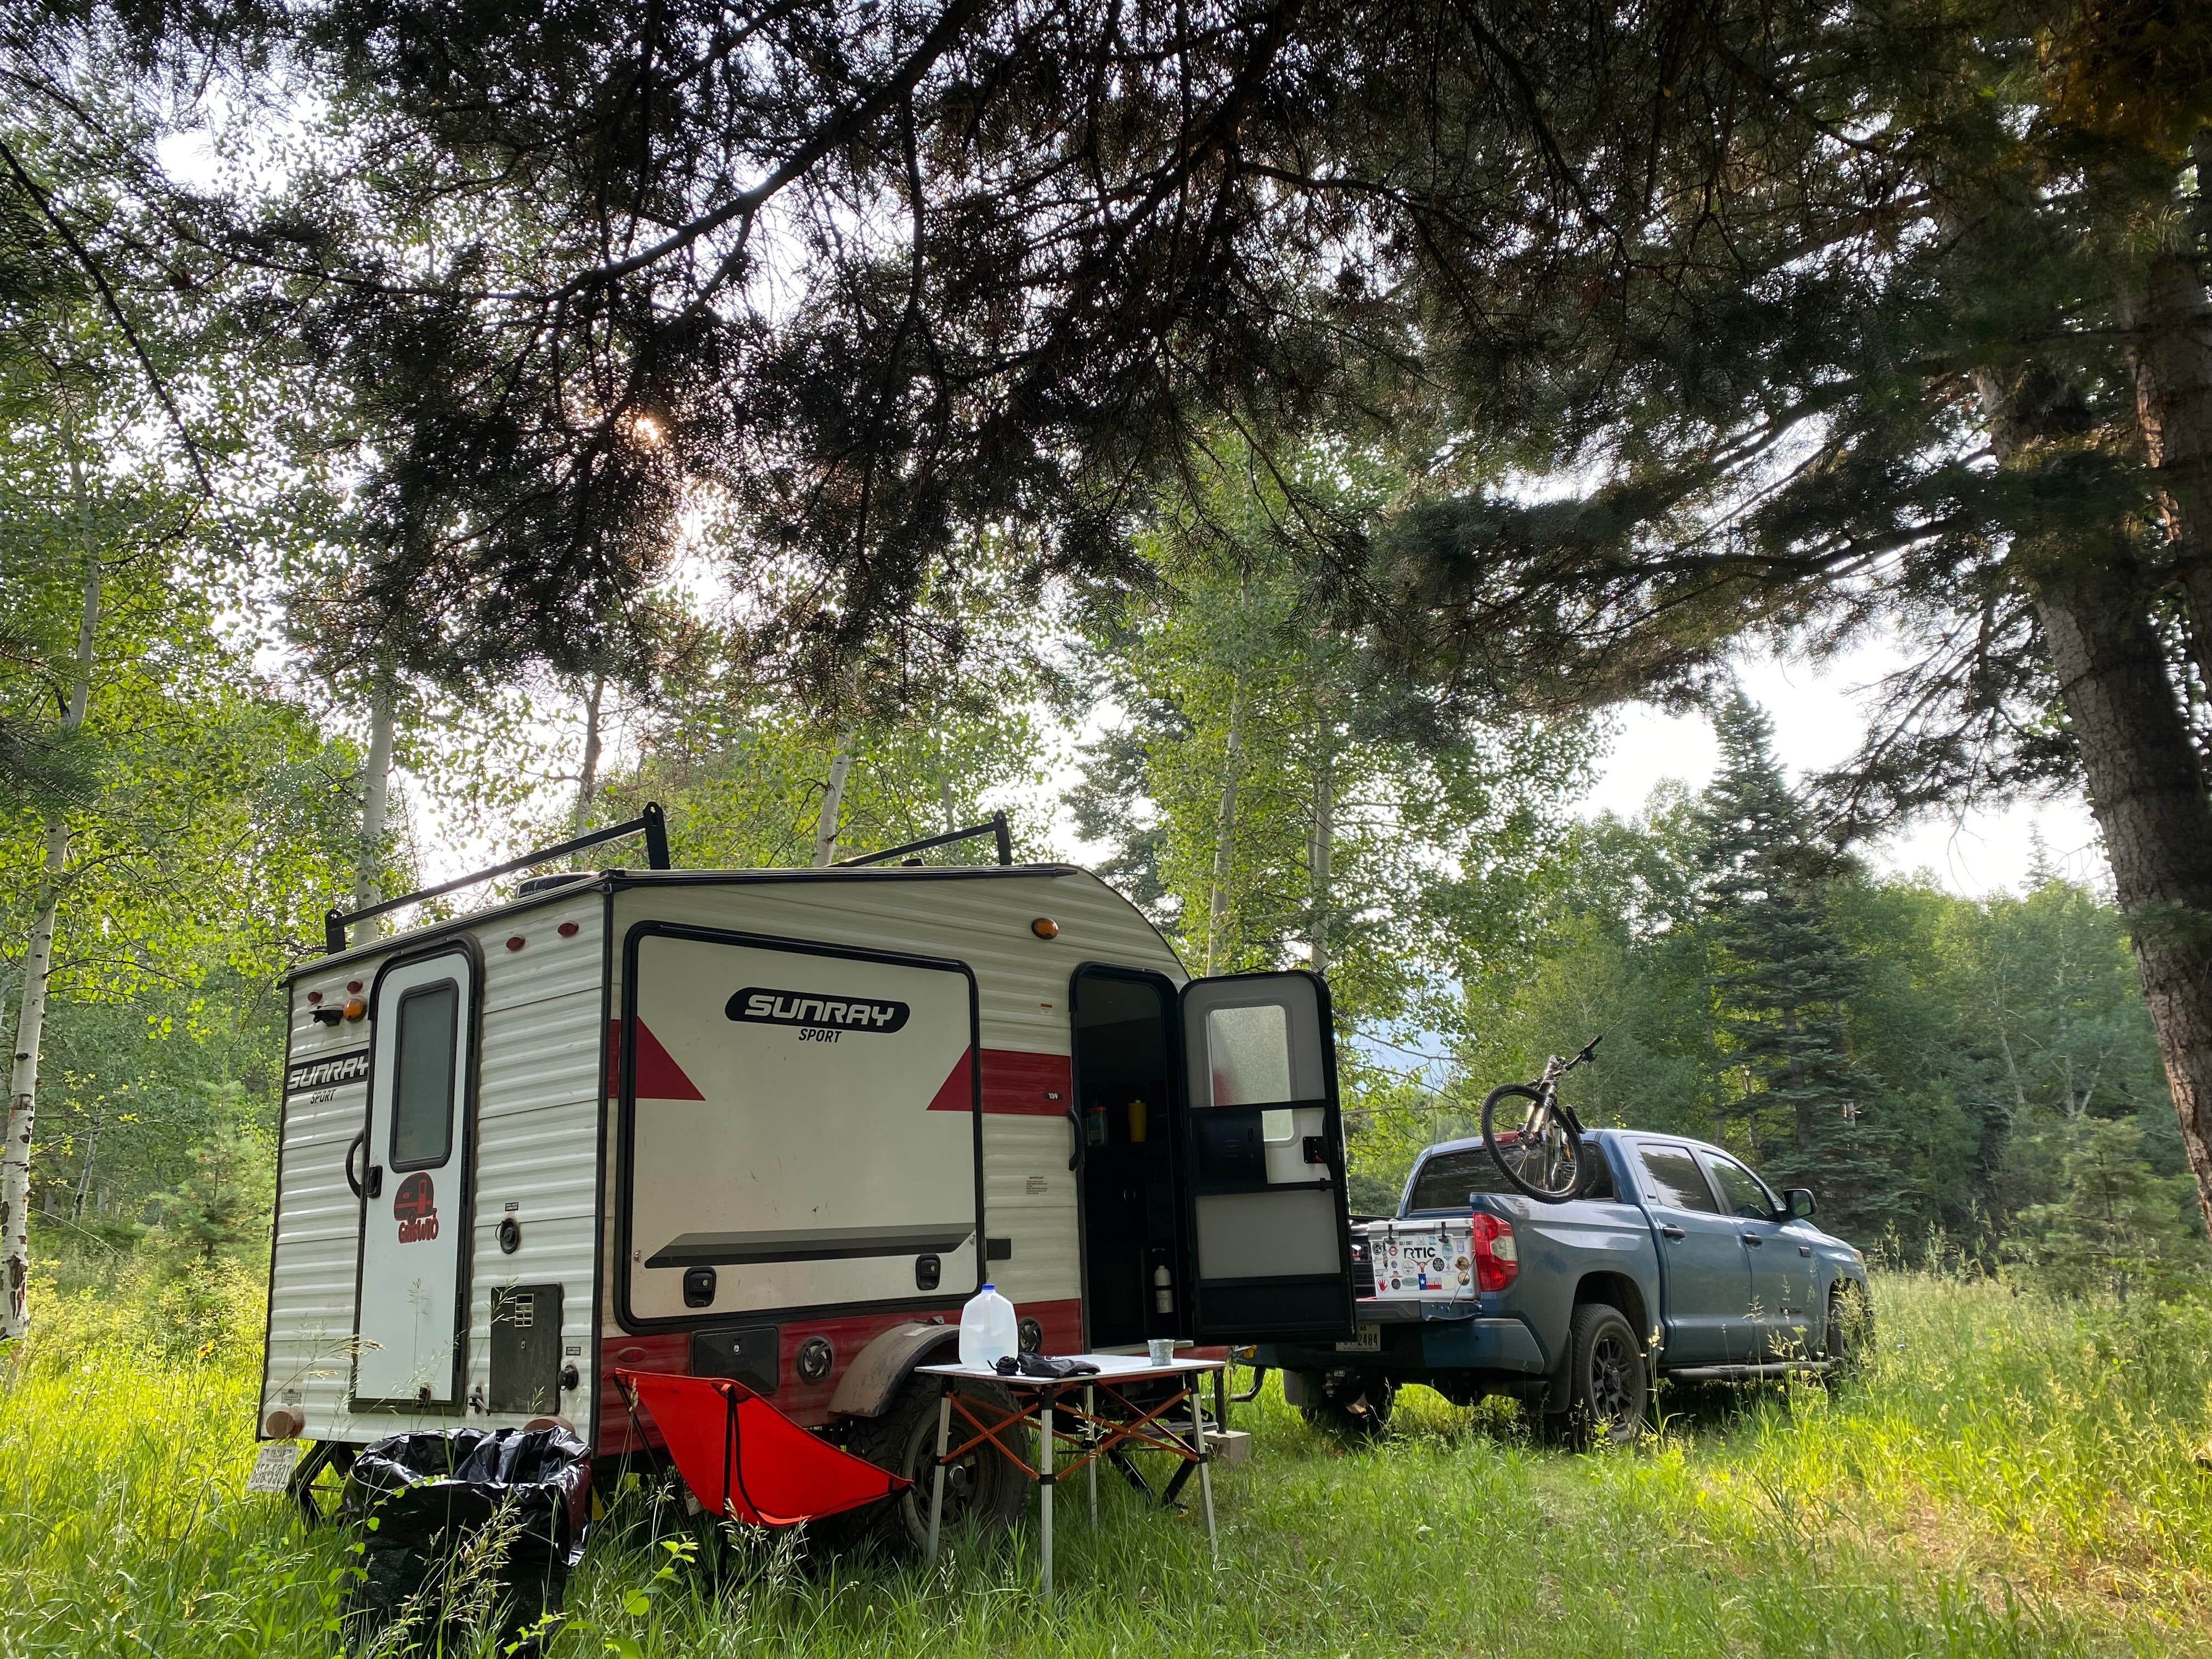 Camper submitted image from FS Road 662 campsite - 2